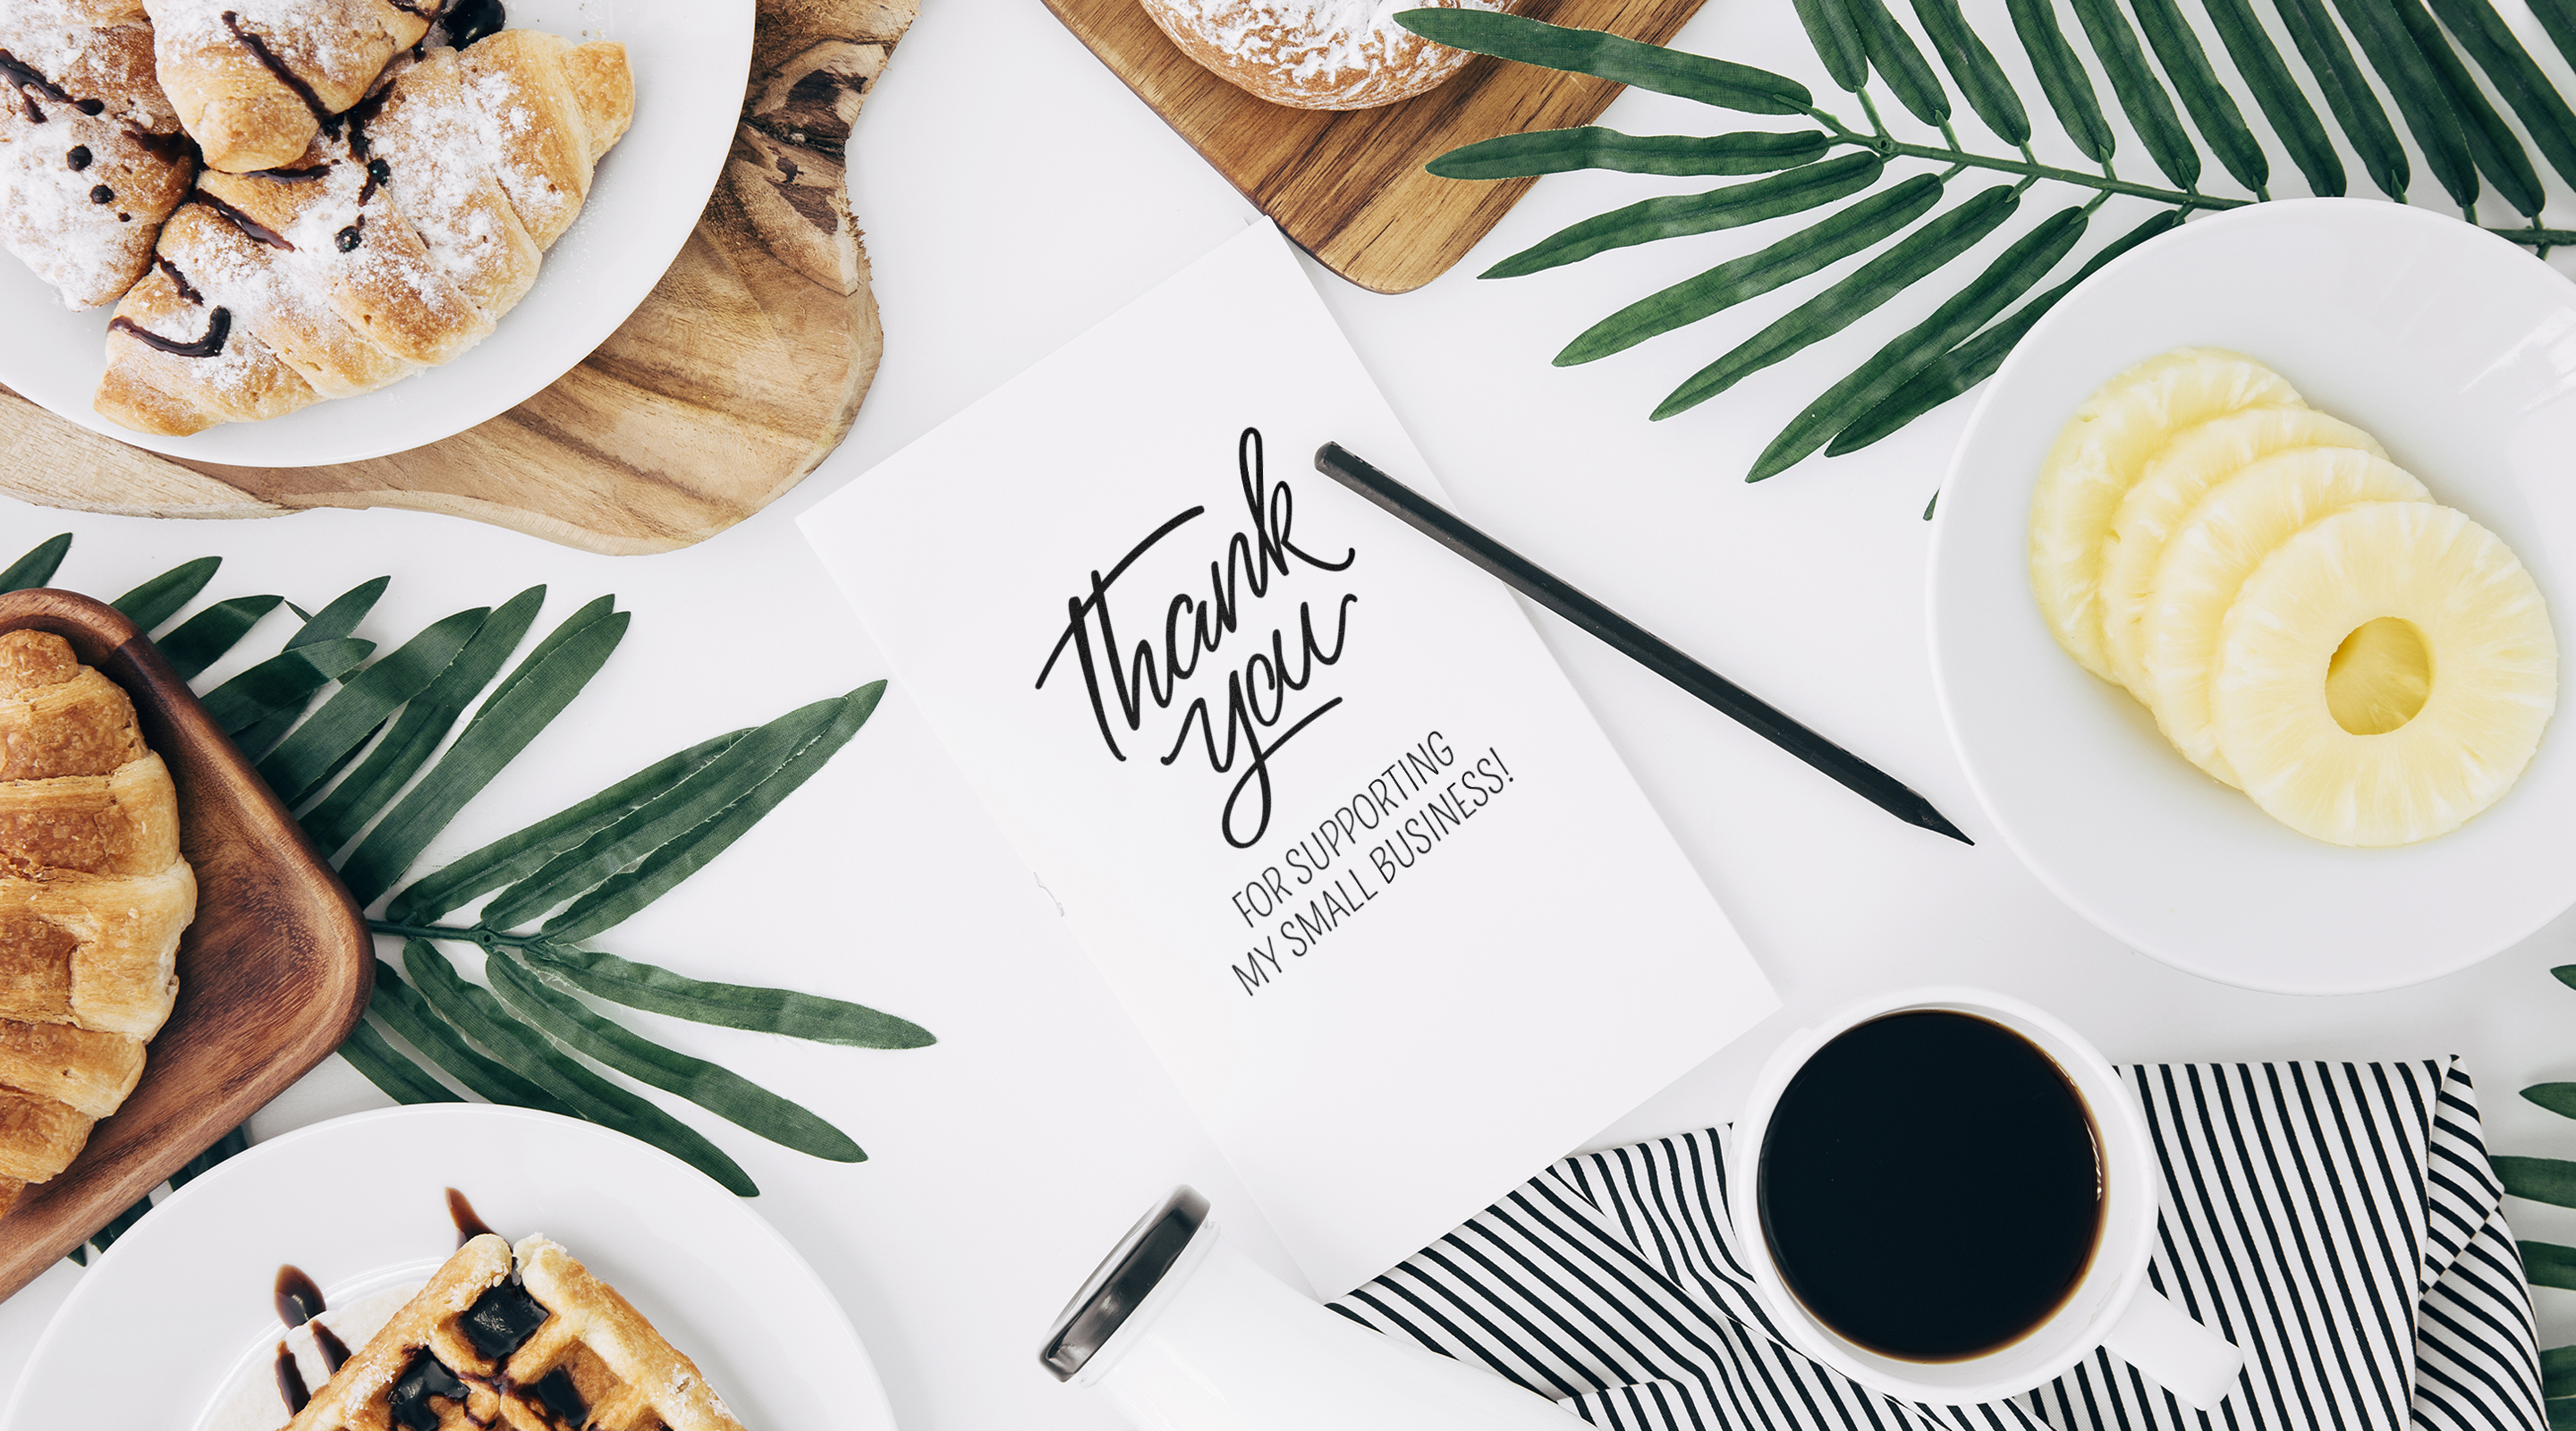 business thank you cards